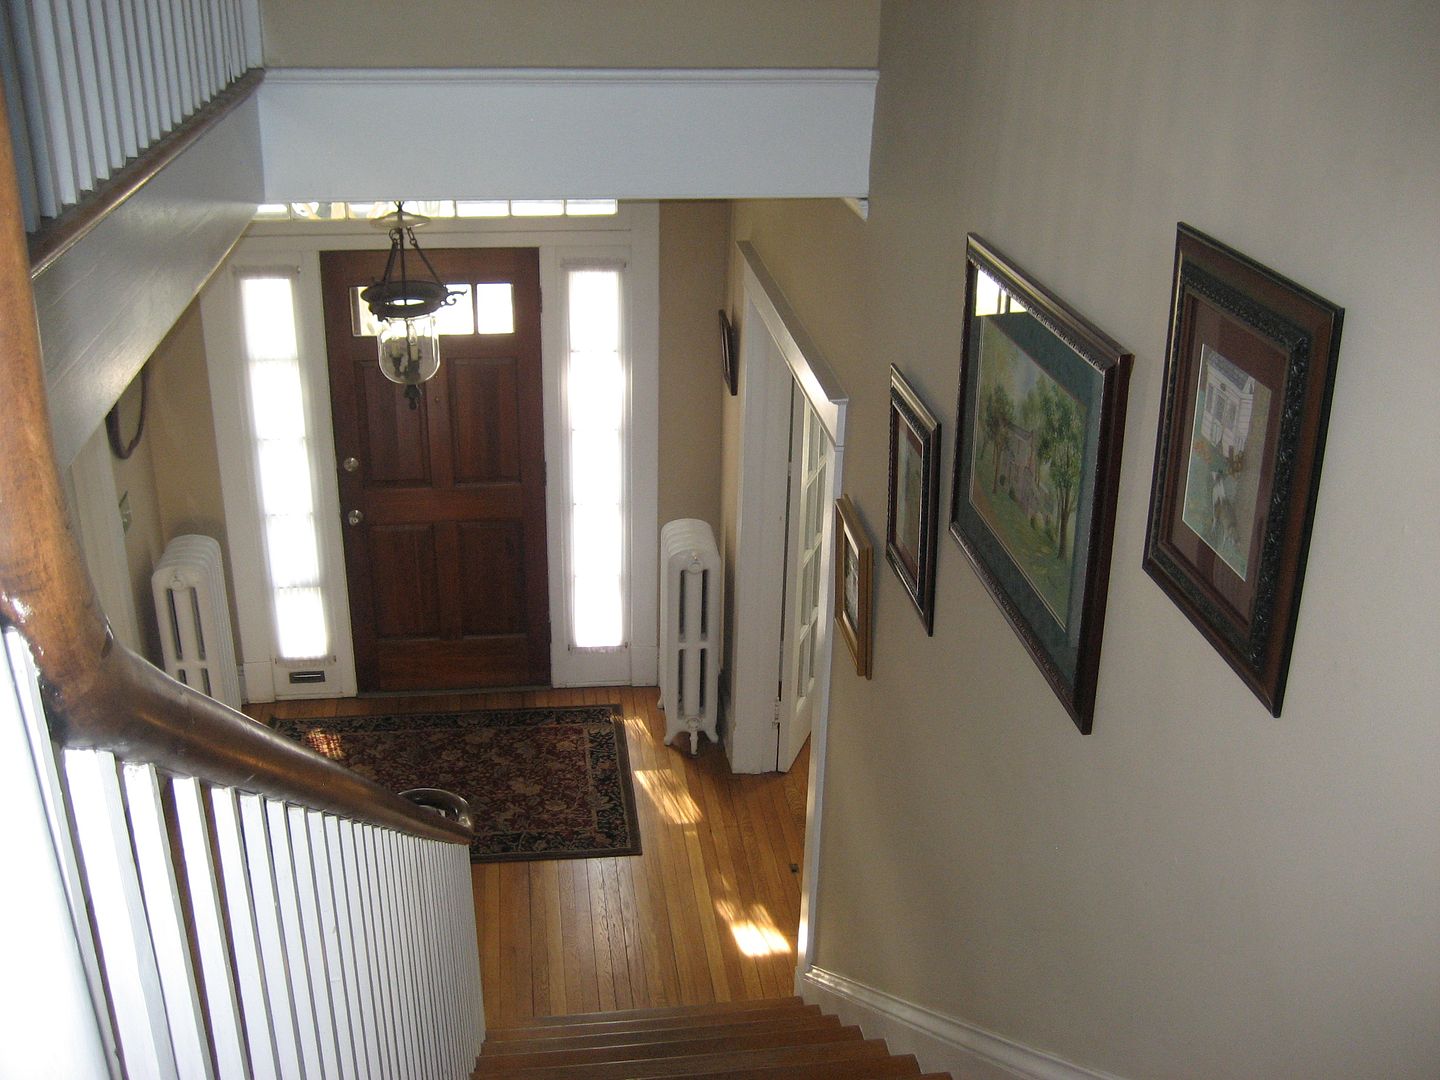 View from upstairs - looking into the foyer.